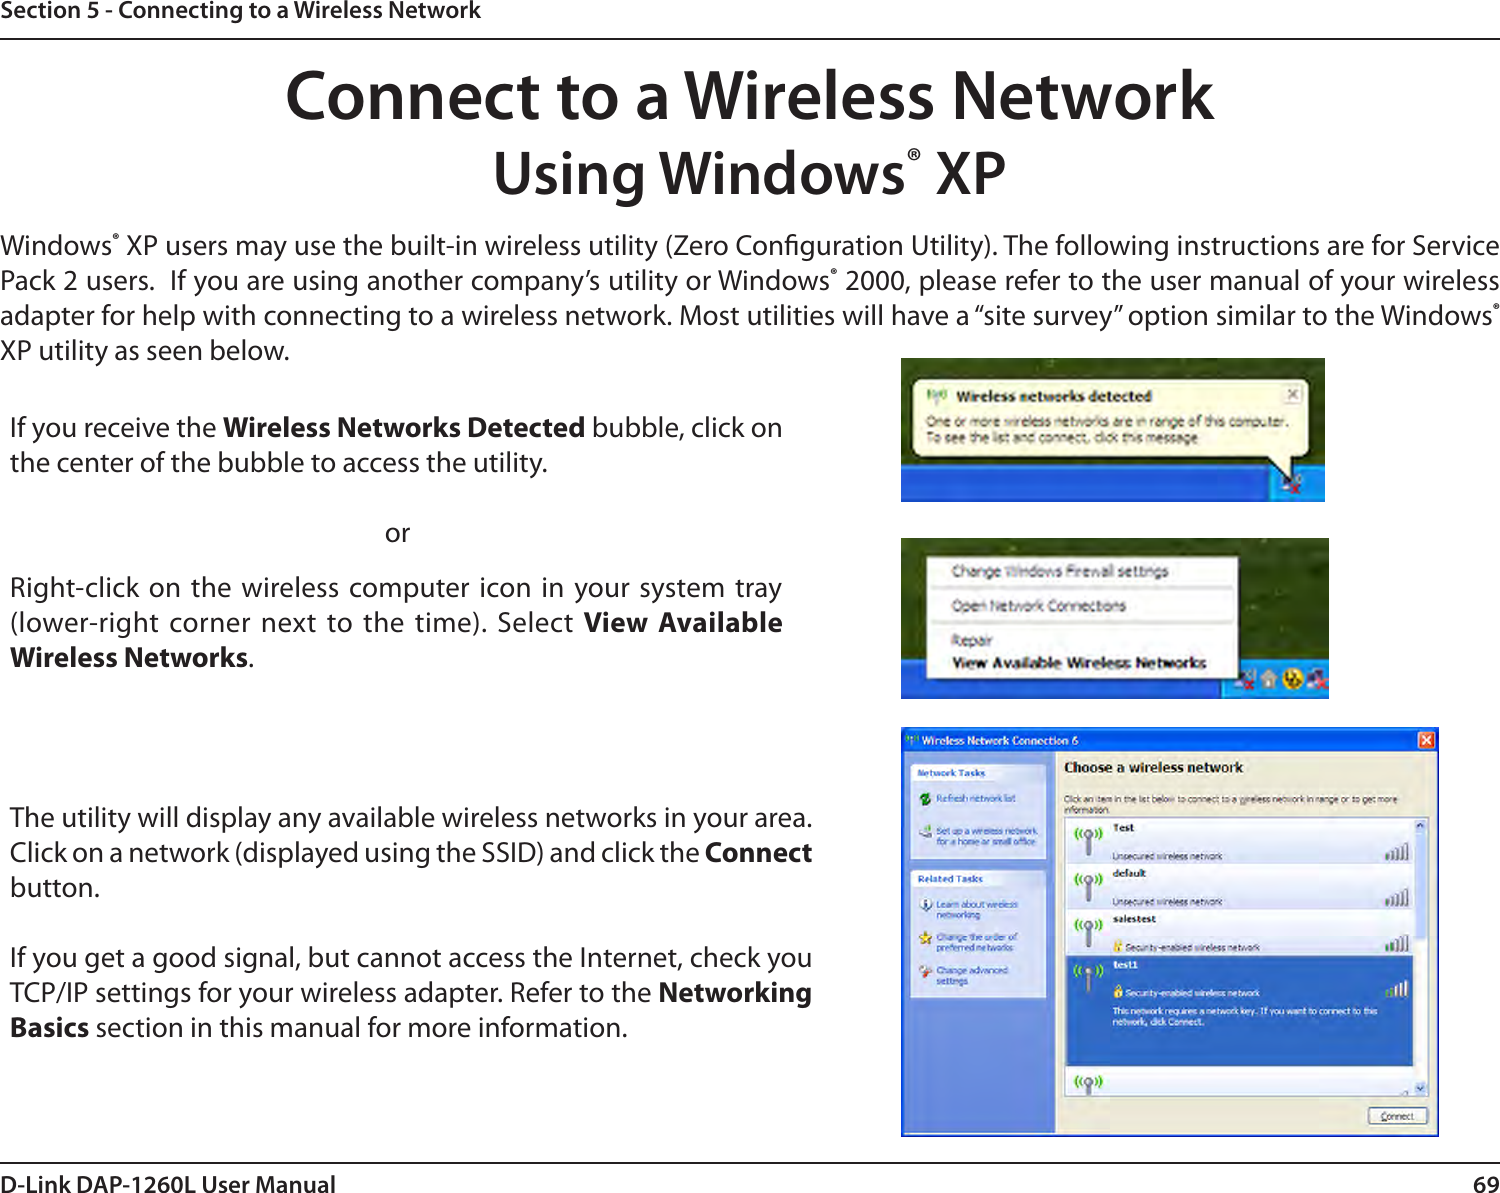 69D-Link DAP-1260L User ManualSection 5 - Connecting to a Wireless NetworkConnect to a Wireless NetworkUsing Windows® XPWindows® XP users may use the built-in wireless utility (Zero Conguration Utility). The following instructions are for Service Pack 2 users.  If you are using another company’s utility or Windows® 2000, please refer to the user manual of your wireless adapter for help with connecting to a wireless network. Most utilities will have a “site survey” option similar to the Windows® XP utility as seen below.Right-click on  the wireless computer icon in your system tray (lower-right corner next to the time).  Select View Available Wireless Networks.If you receive the Wireless Networks Detected bubble, click on the center of the bubble to access the utility.     orThe utility will display any available wireless networks in your area. Click on a network (displayed using the SSID) and click the Connect button.If you get a good signal, but cannot access the Internet, check you TCP/IP settings for your wireless adapter. Refer to the Networking Basics section in this manual for more information.